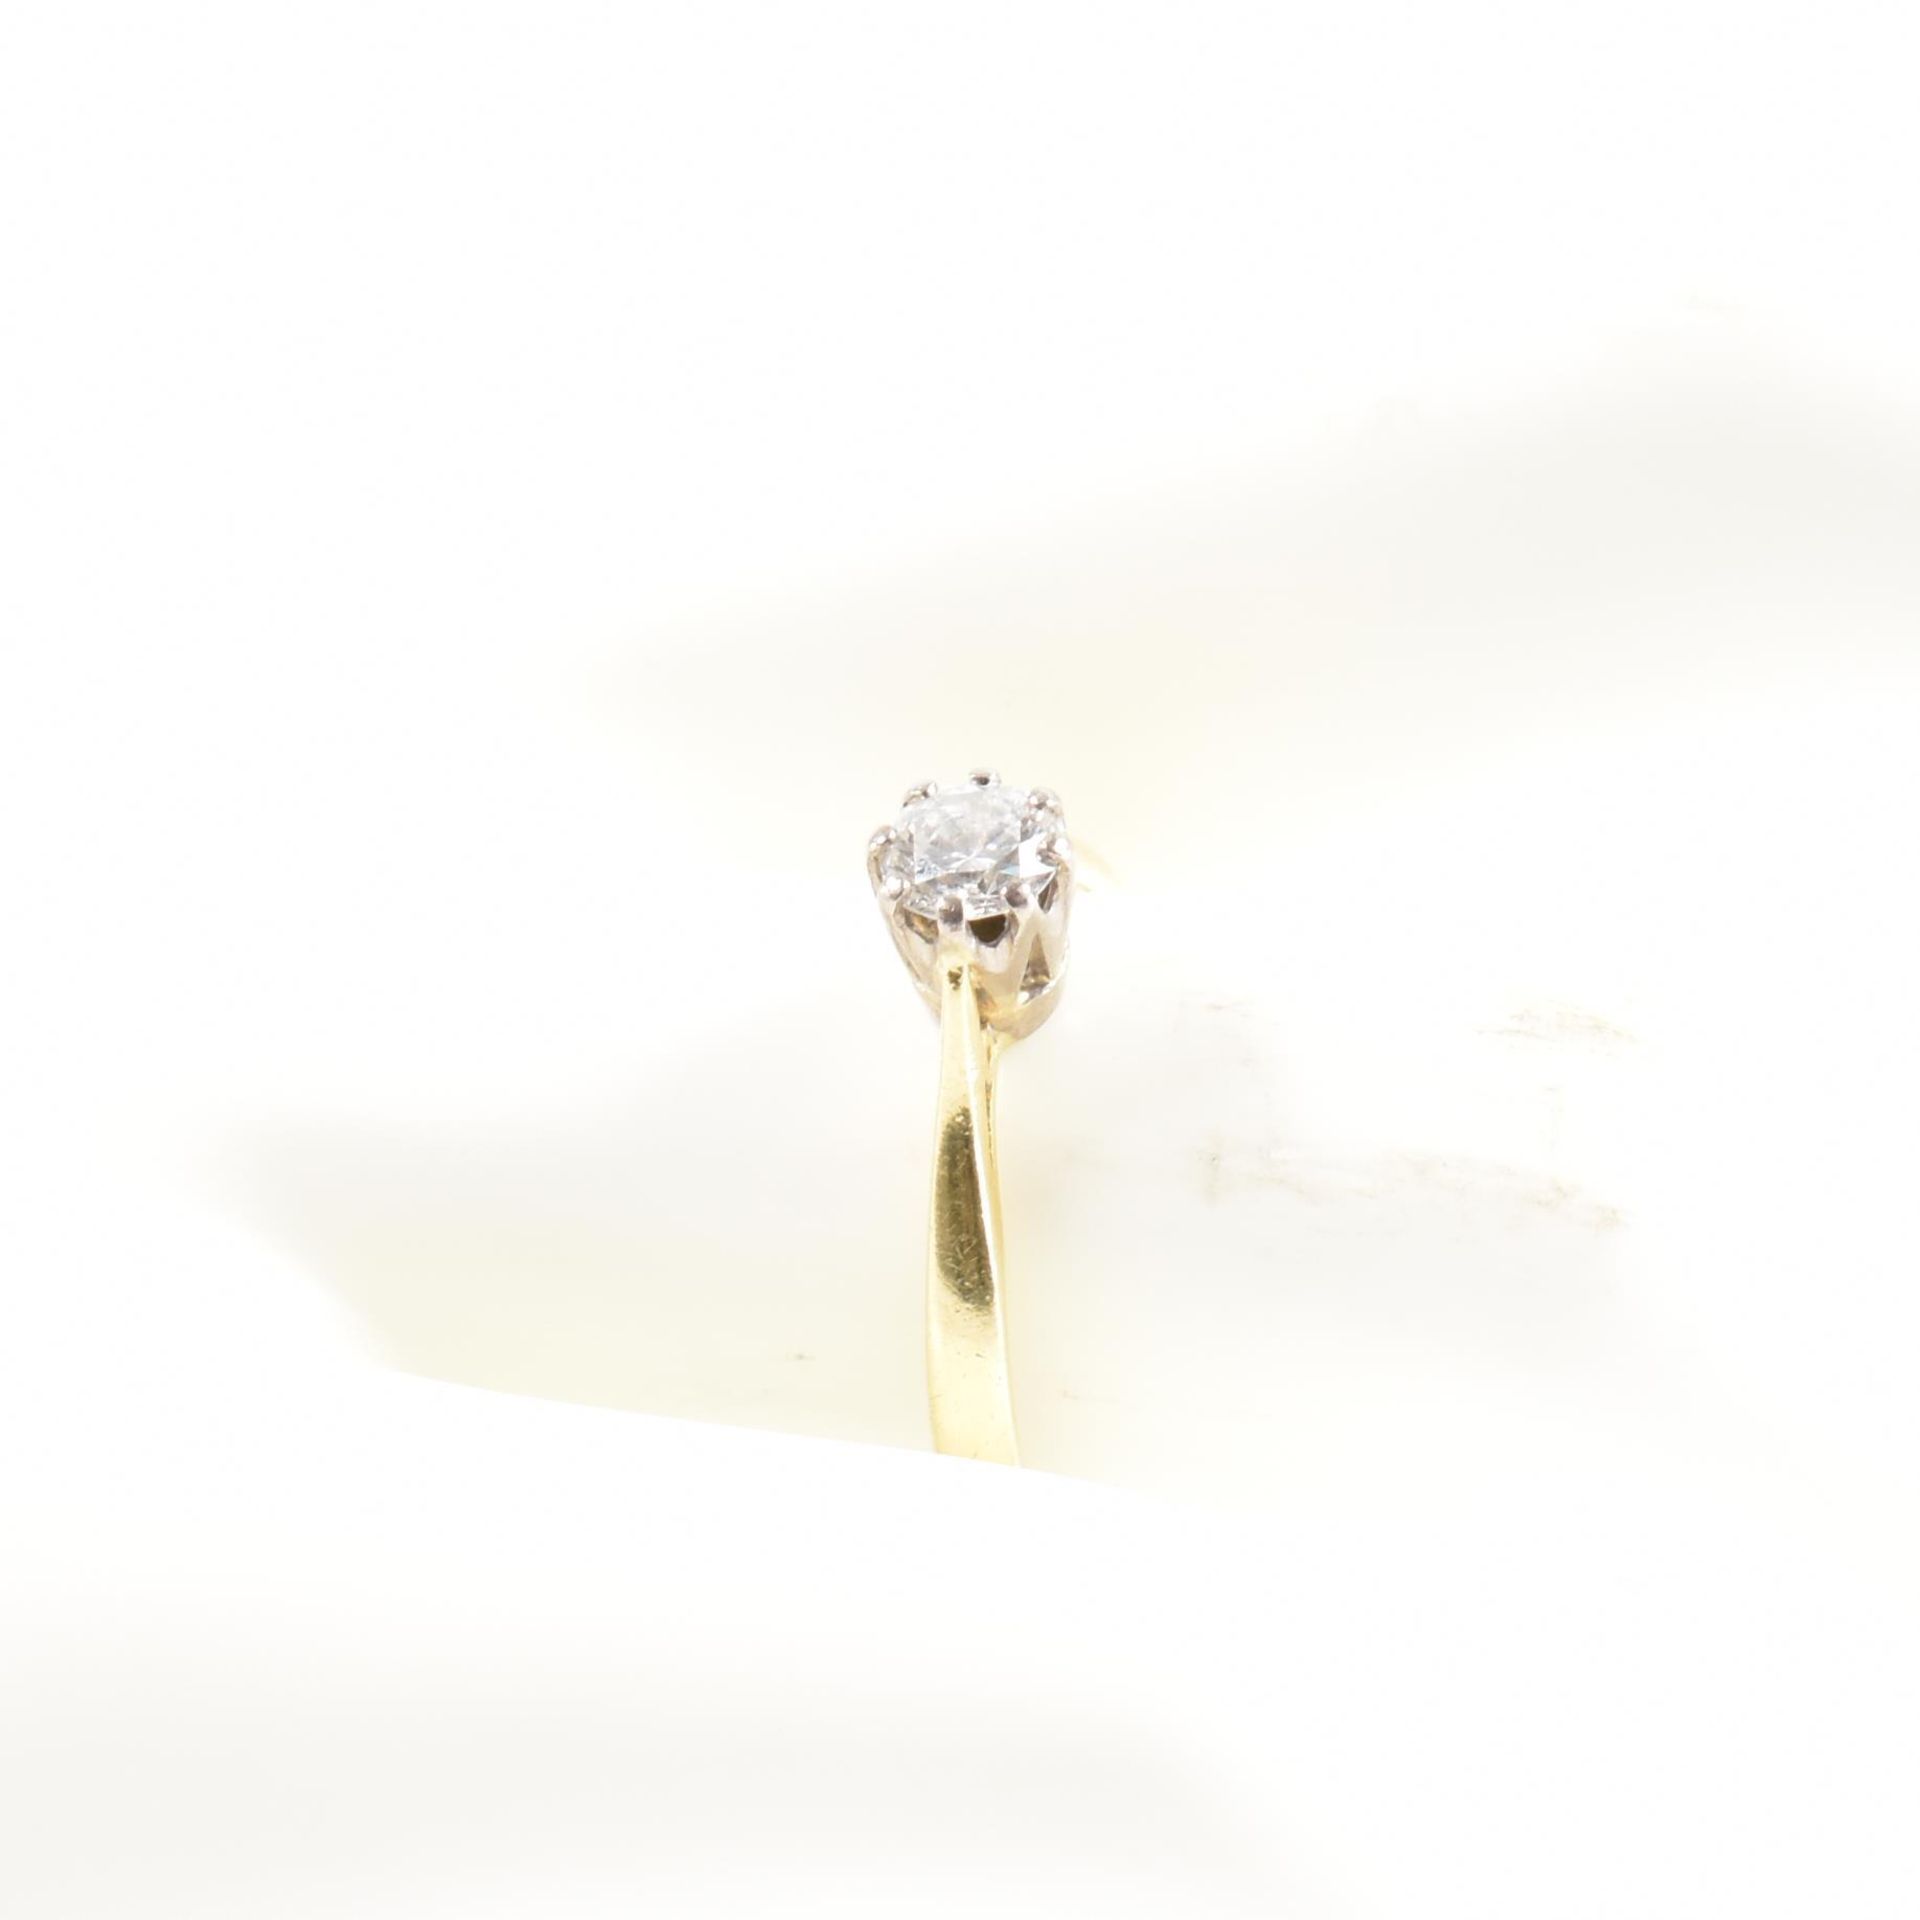 HALLMARKED 18CT GOLD & DIAMOND SOLITAIRE RING - Image 9 of 9